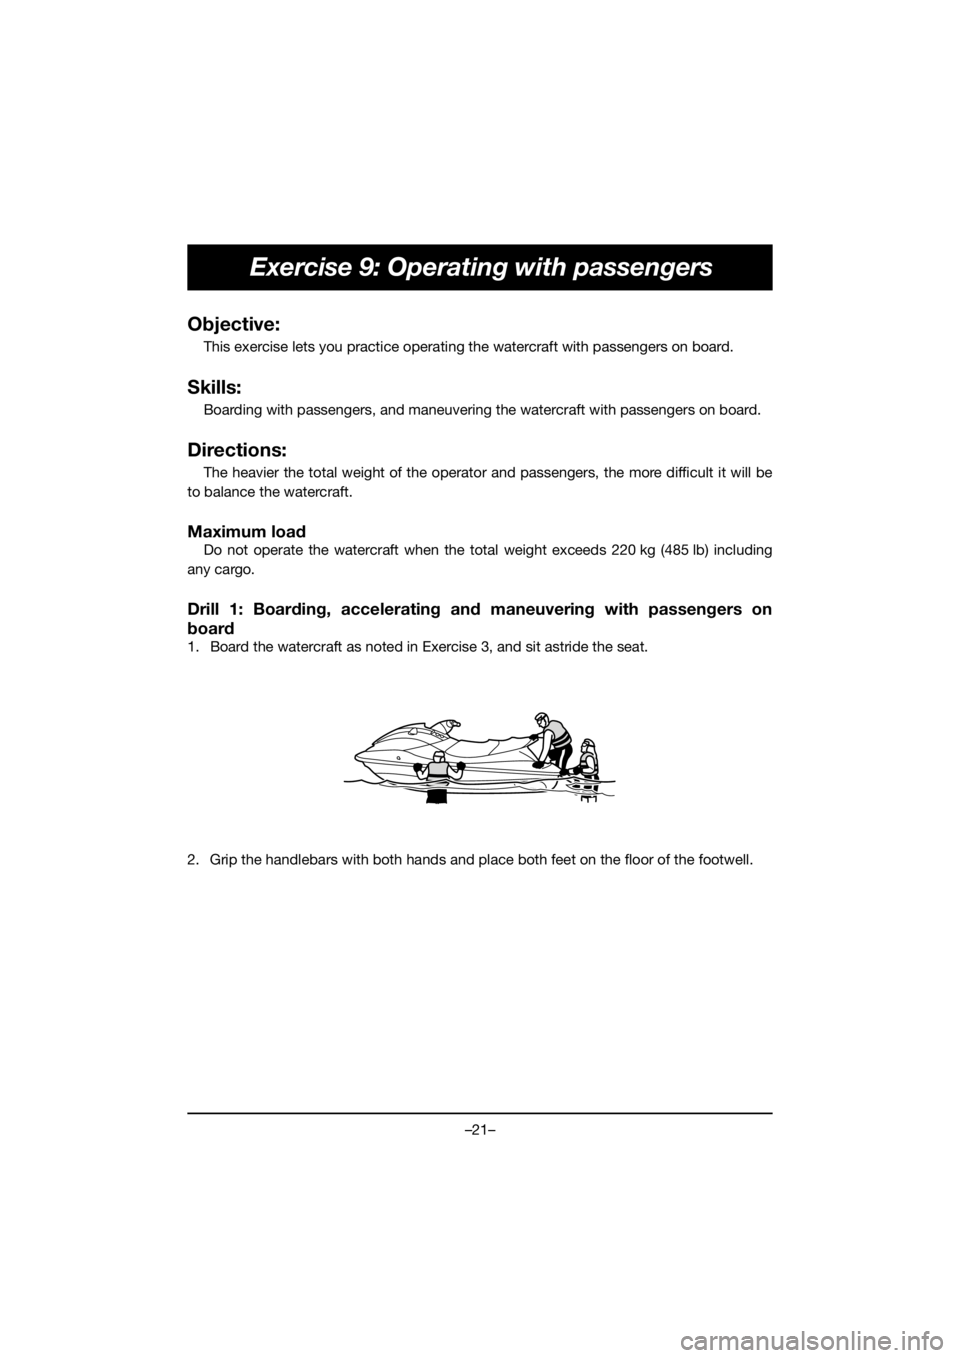 YAMAHA EX 2019  Notices Demploi (in French) –21–
Exercise 9: Operating with passengers
Objective:
This exercise lets you practice operating the watercraft with passengers on board.
Skills:
Boarding with passengers, and maneuvering the water